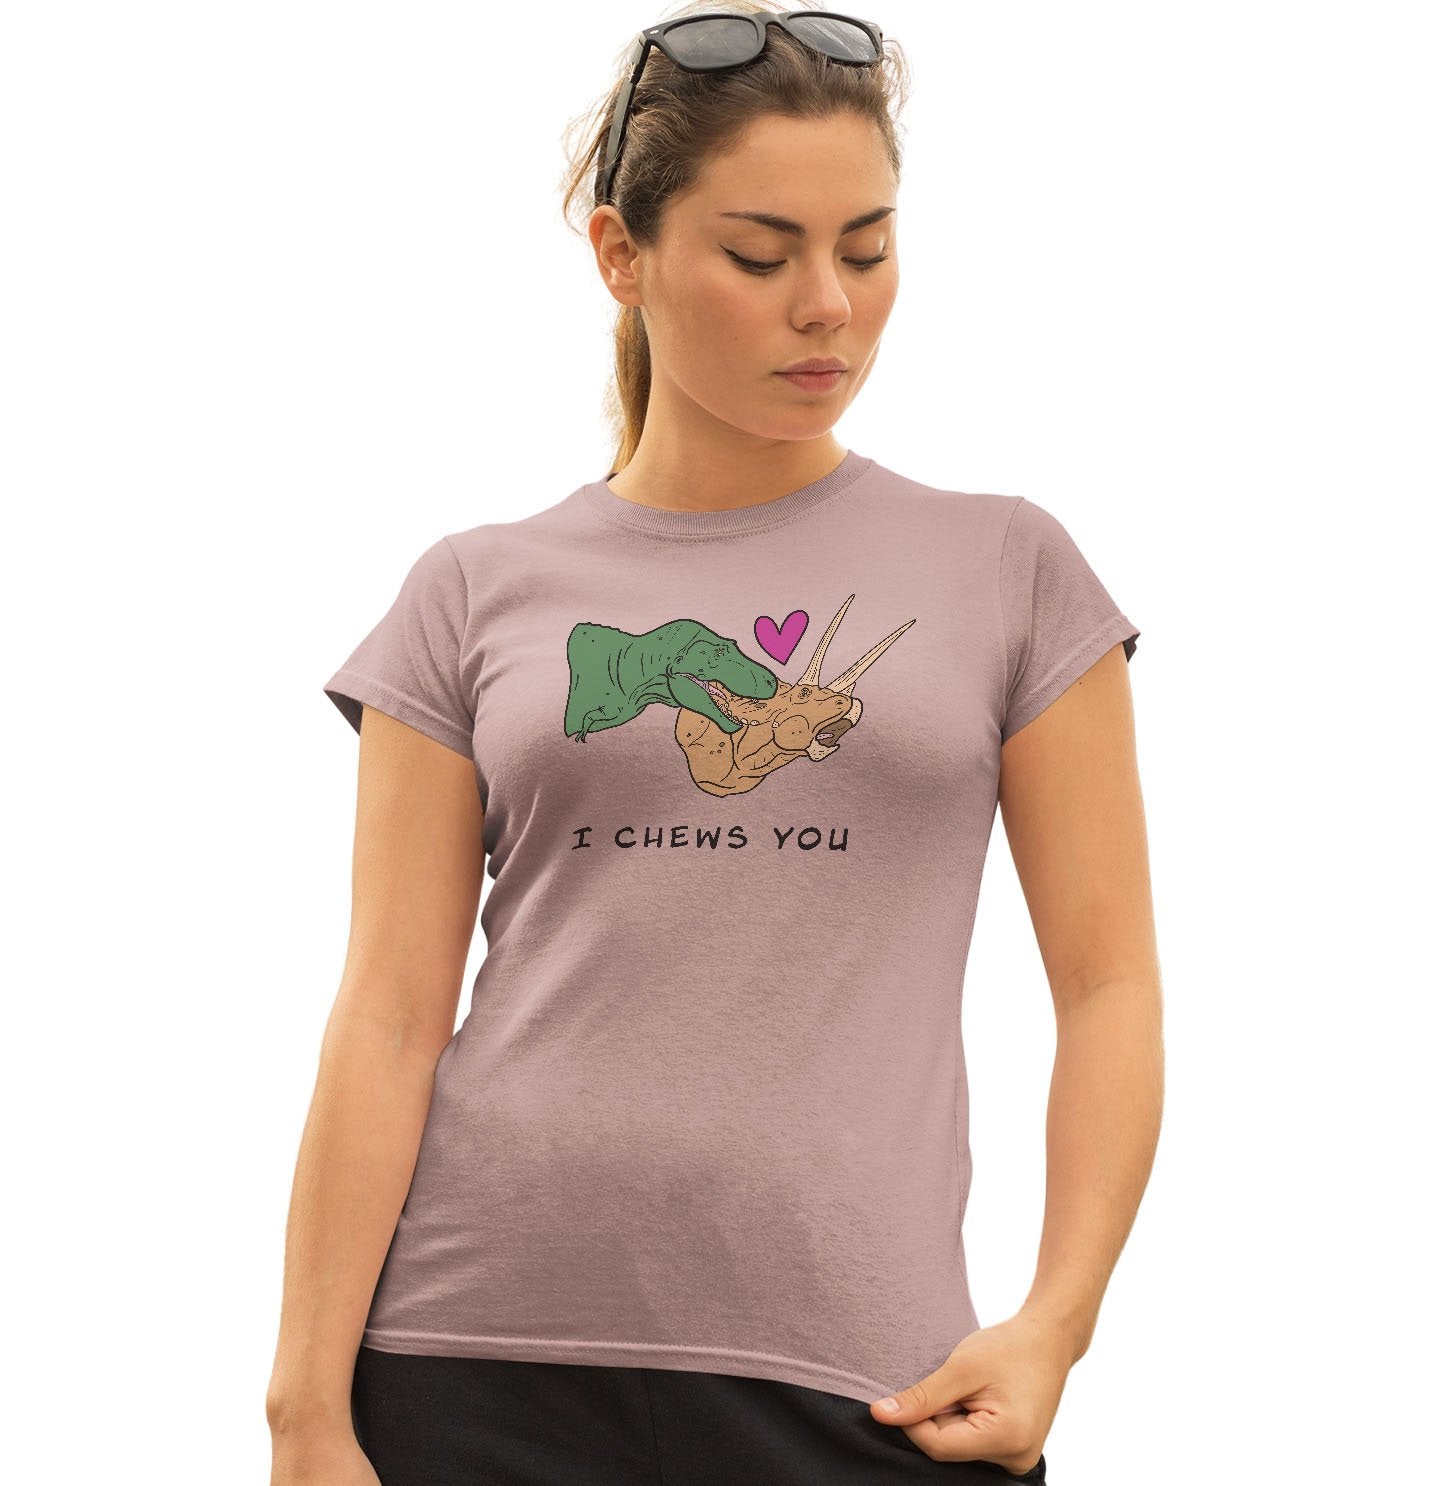 I Chews You Dinosaurs - Women's Fitted T-Shirt